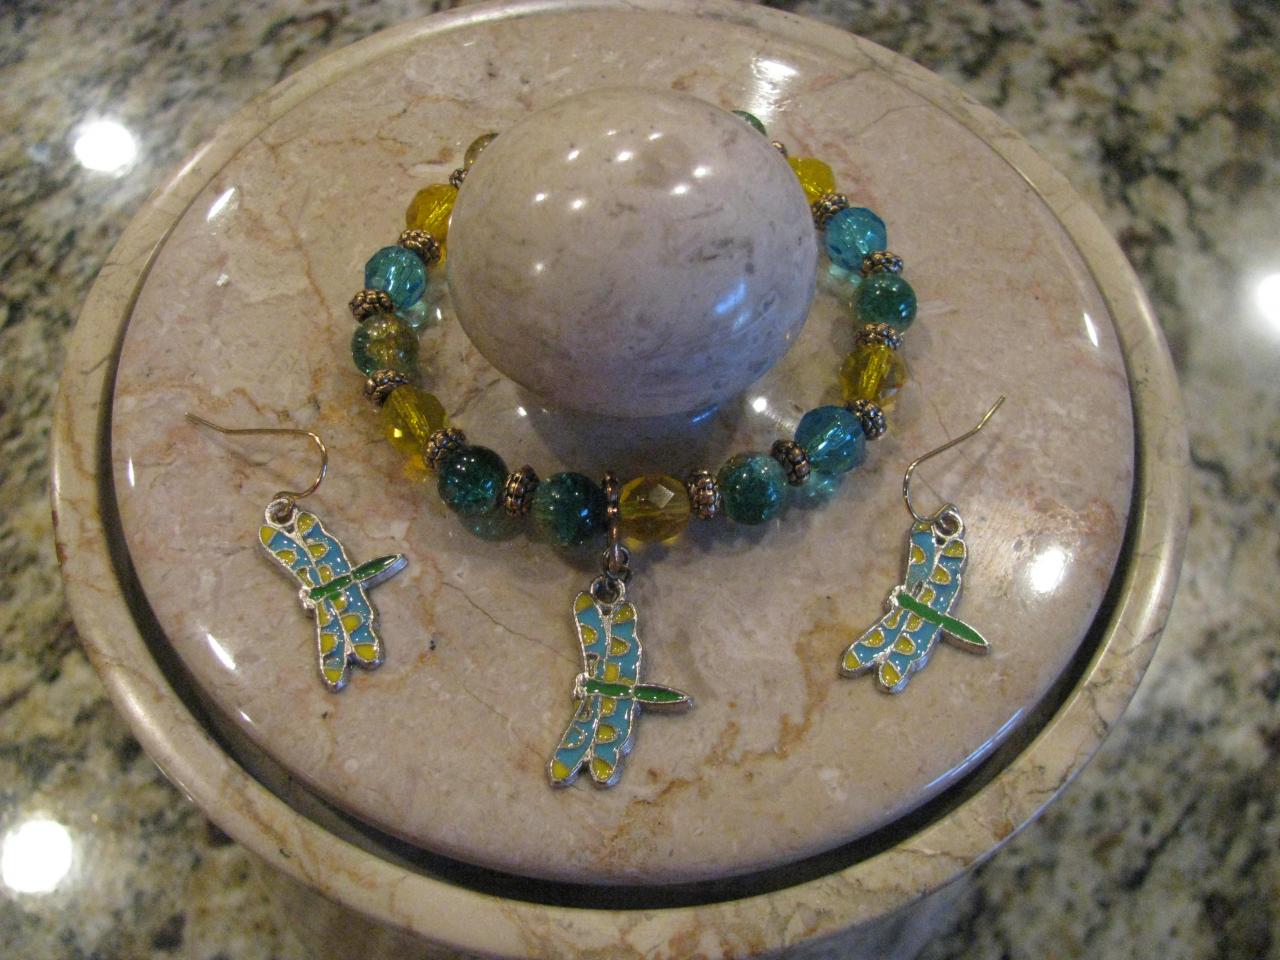 10 Off 2set Gorgeous Kids Colorful Dragonfly Jewelries Elastic Charm Bracelet And Matching Earrings